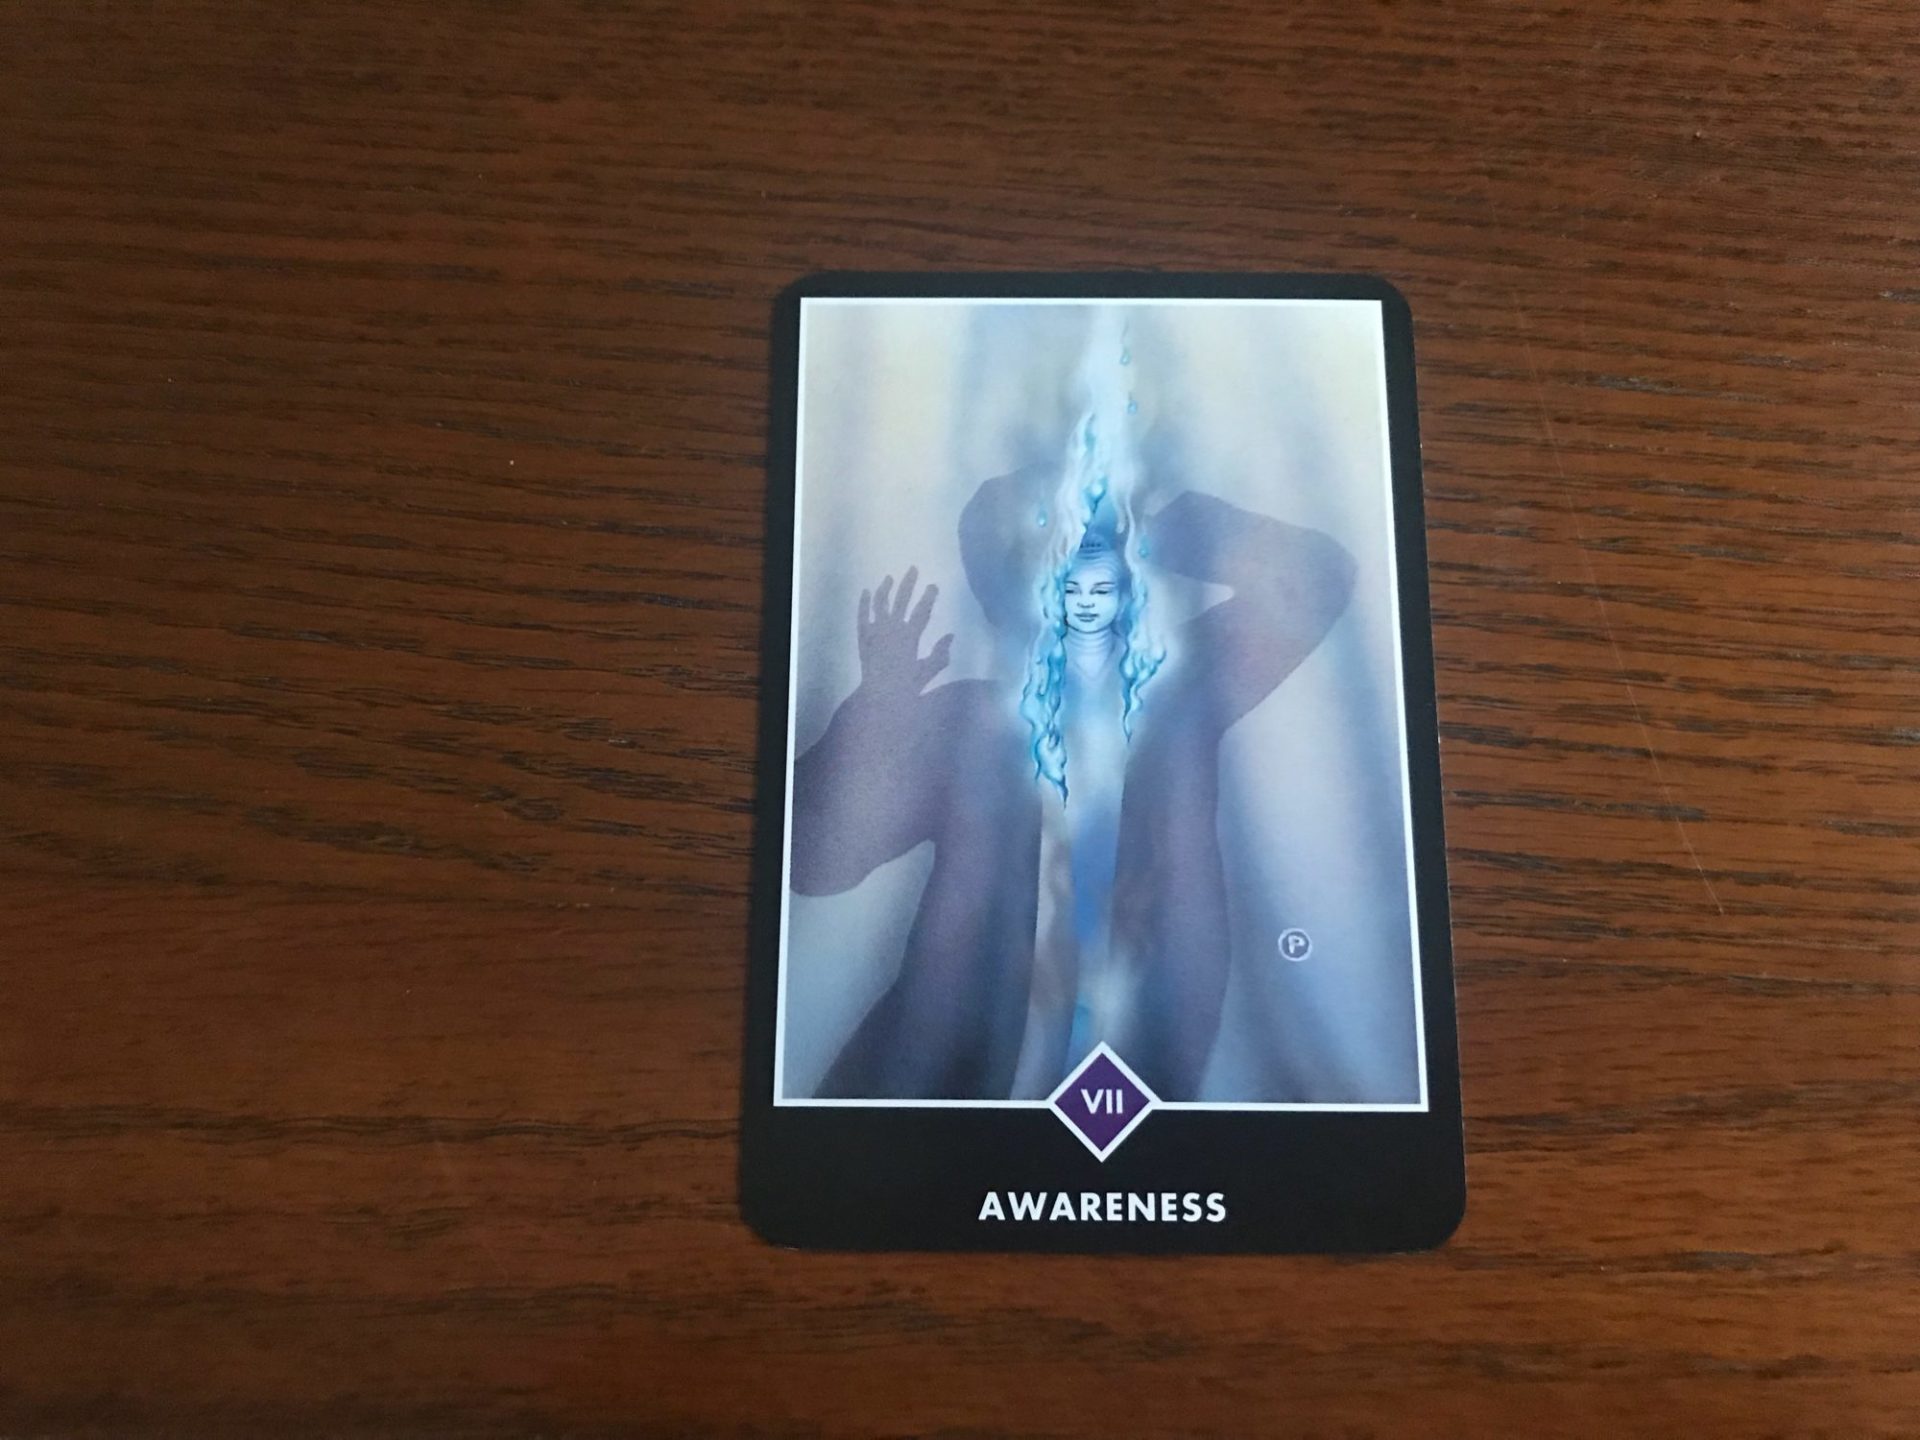 Osho Zen Tarot - Awareness (the Chariot) - A silhouette on a veil is burned through by the cold blue fire of enlightenment, a bodhisattva emerges.